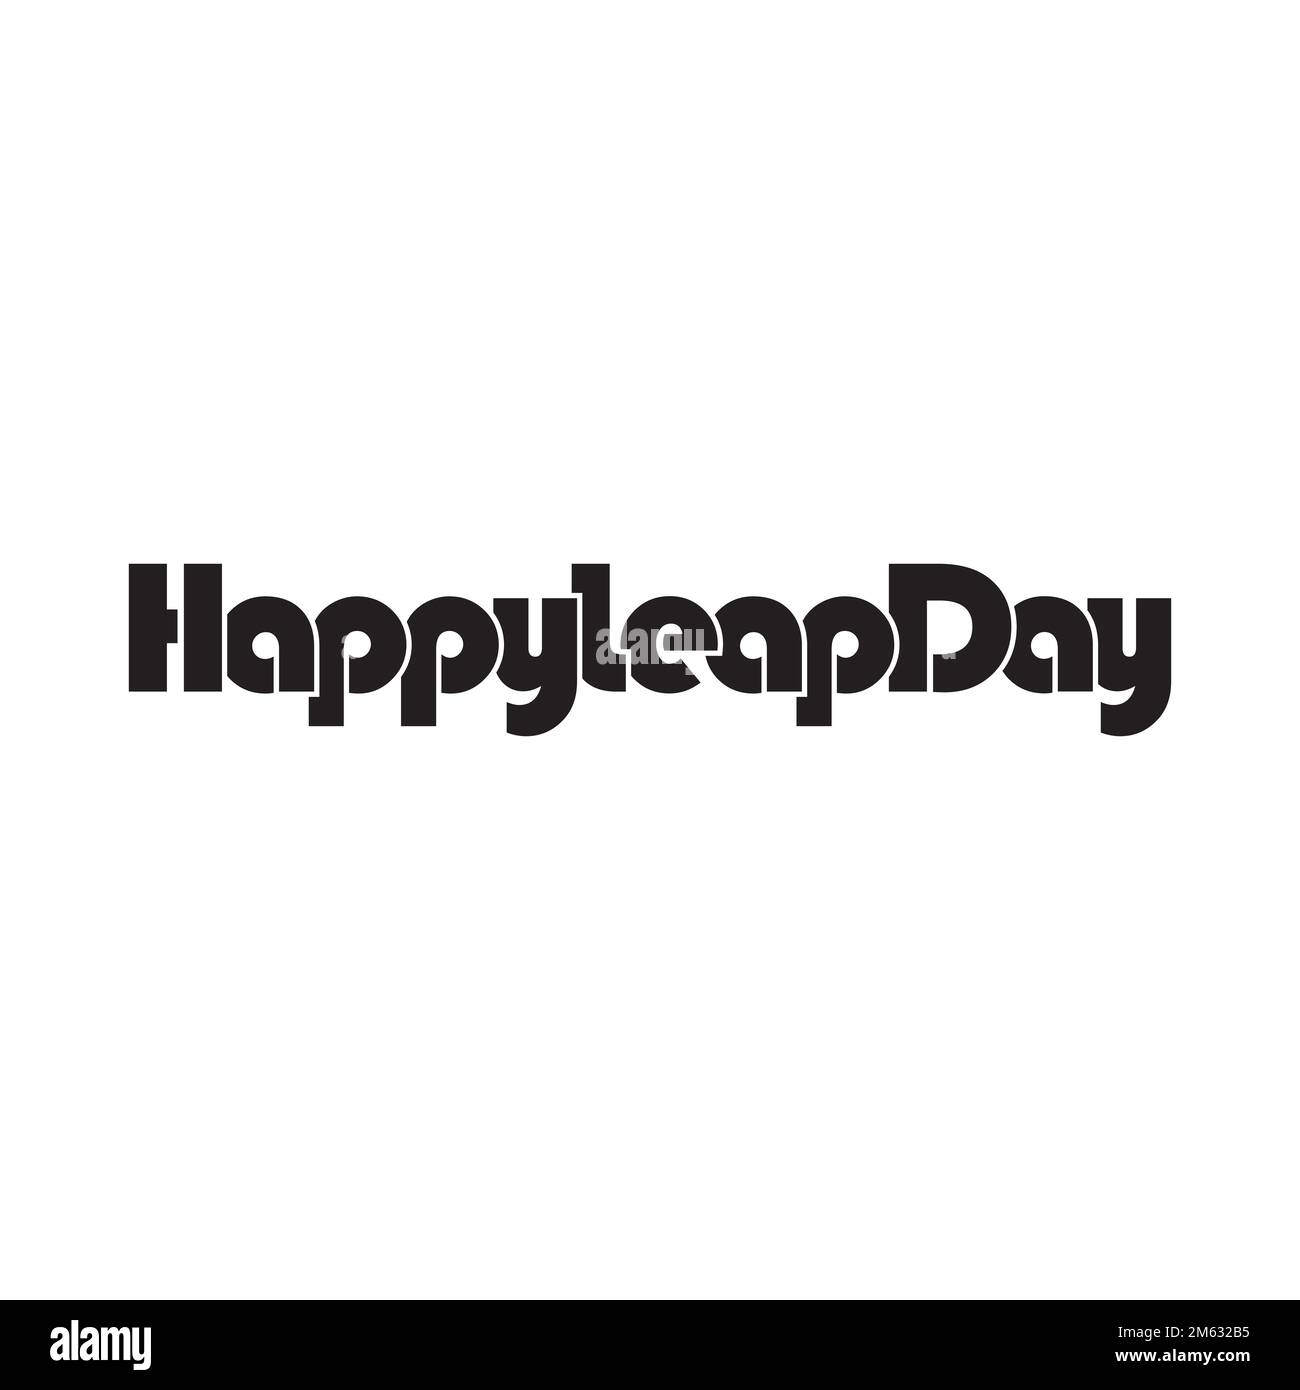 HAPPY YEARS DAY design vector isolated on white background. Stock Vector